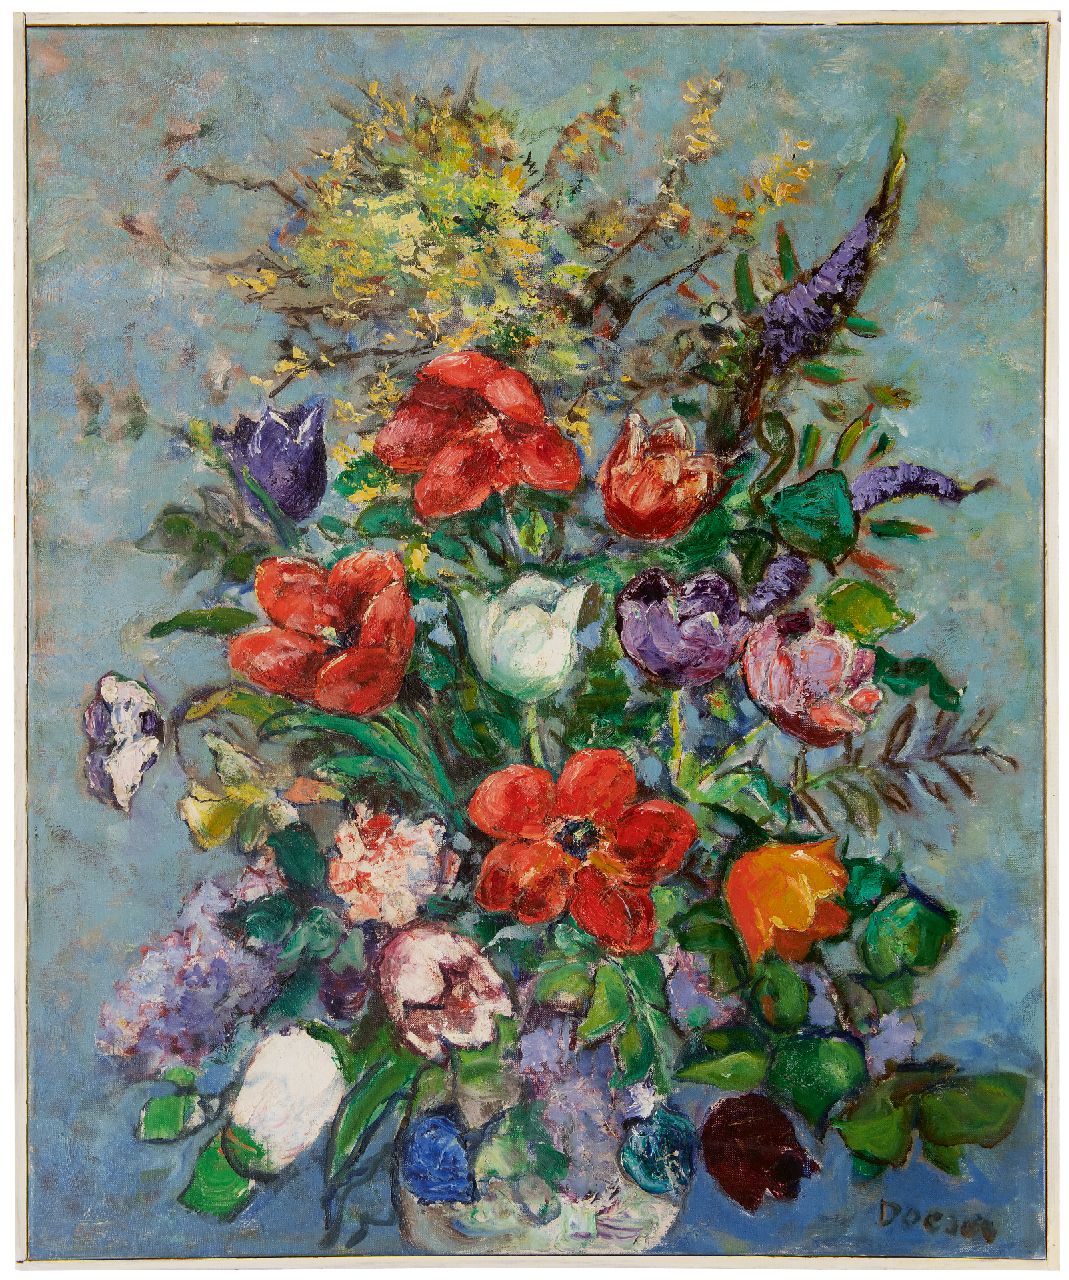 Doeser J.J.  | 'Jacobus' Johannes Doeser | Paintings offered for sale | Summer flowers, oil on canvas 94.8 x 78.0 cm, signed l.r.